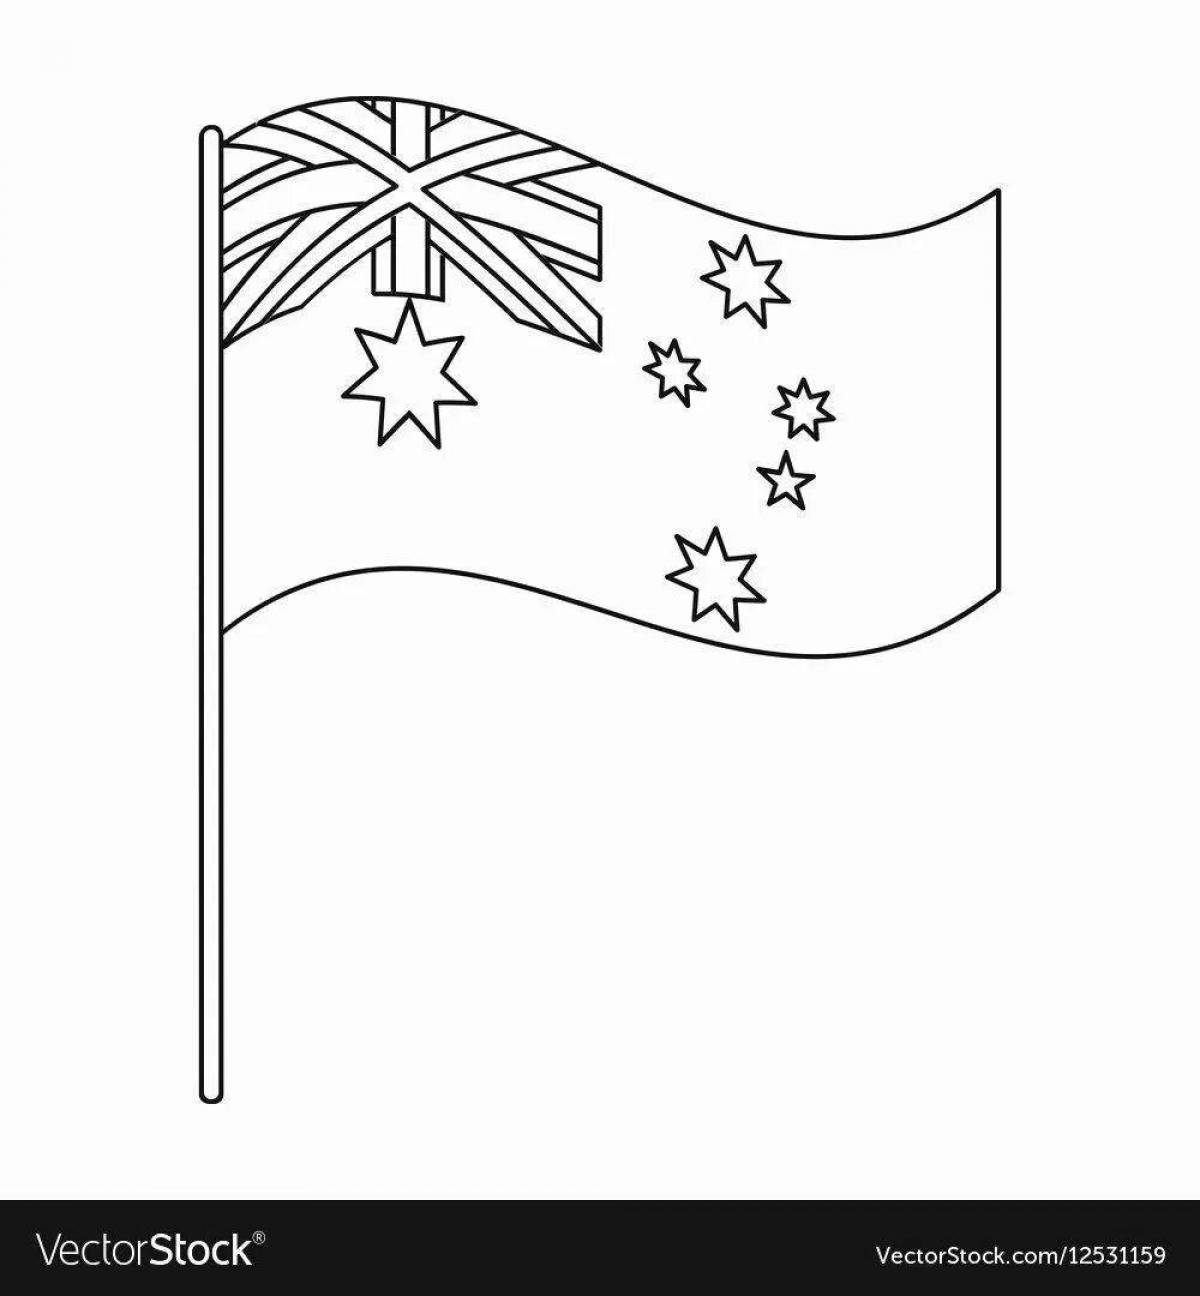 Australia's imposing coat of arms coloring page